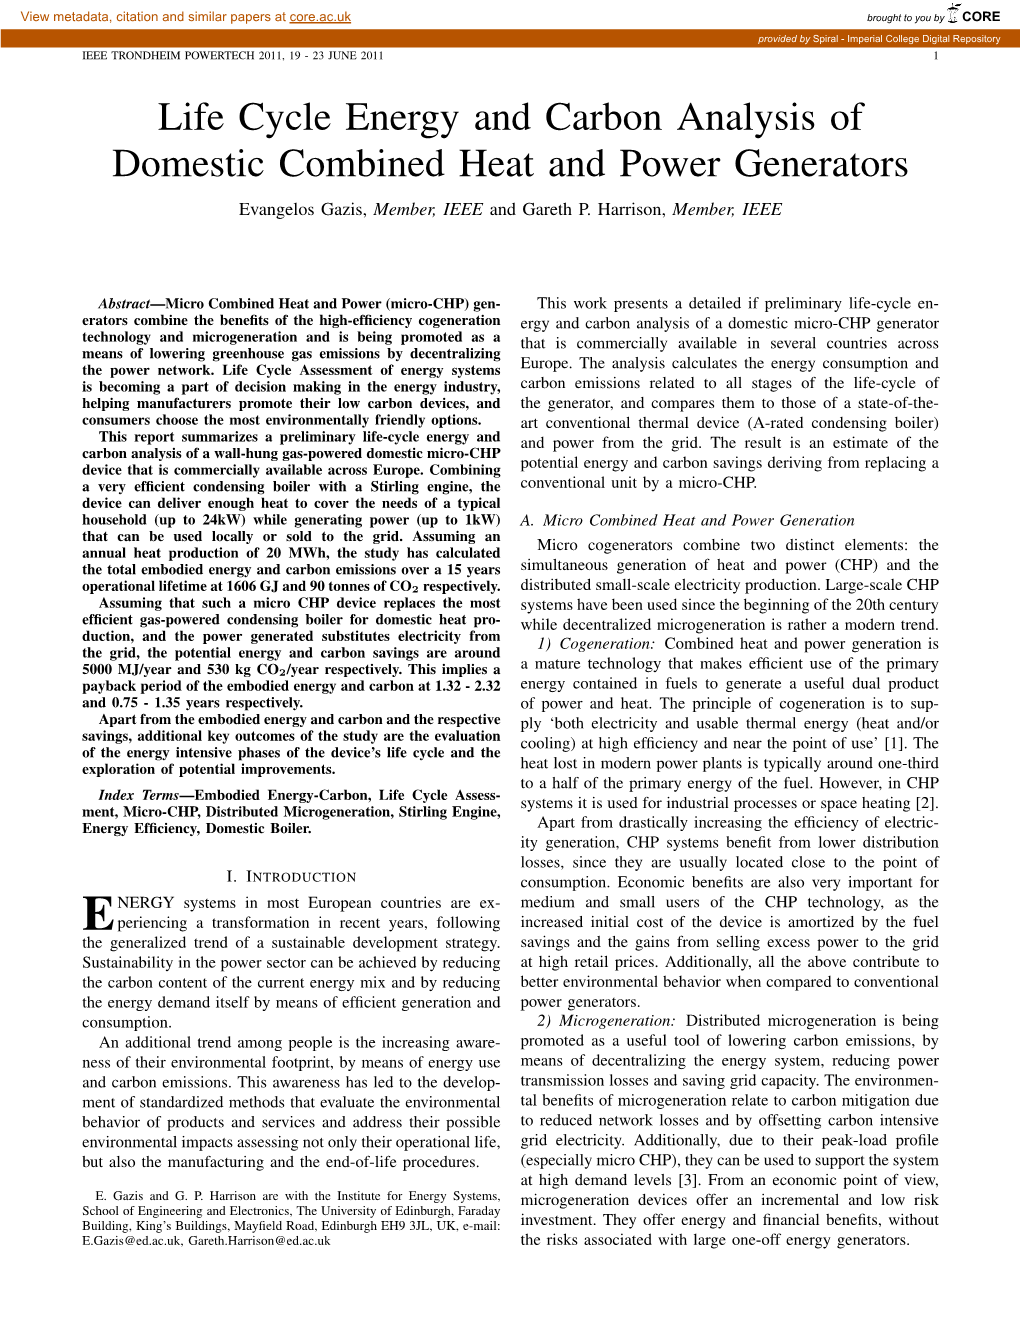 Life Cycle Energy and Carbon Analysis of Domestic Combined Heat and Power Generators Evangelos Gazis, Member, IEEE and Gareth P